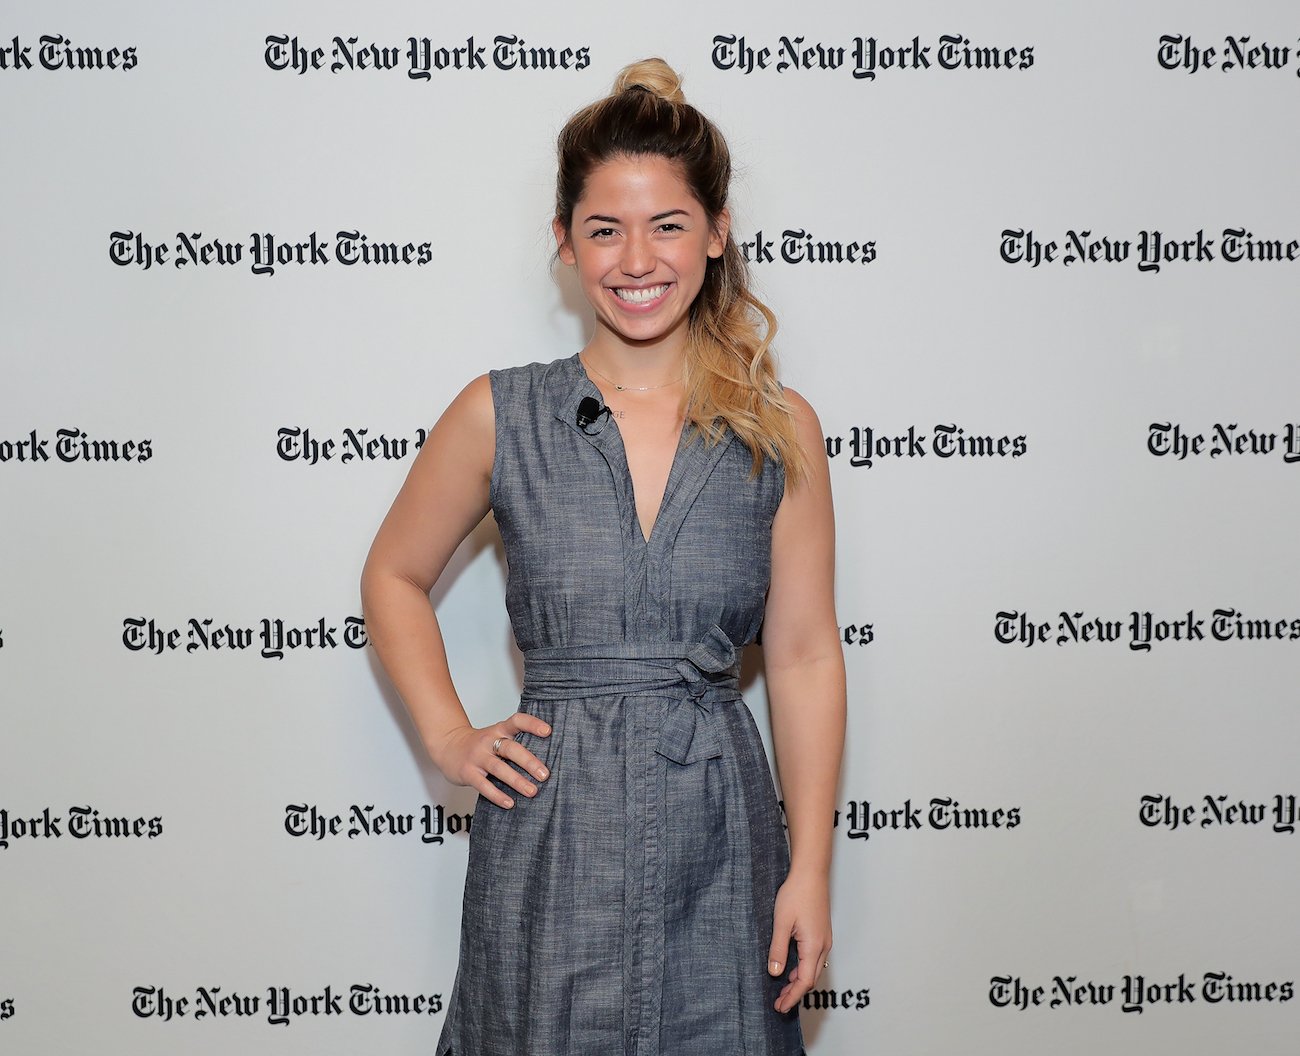 Molly Yeh smiles wearing a blue dress with one hand on her hip